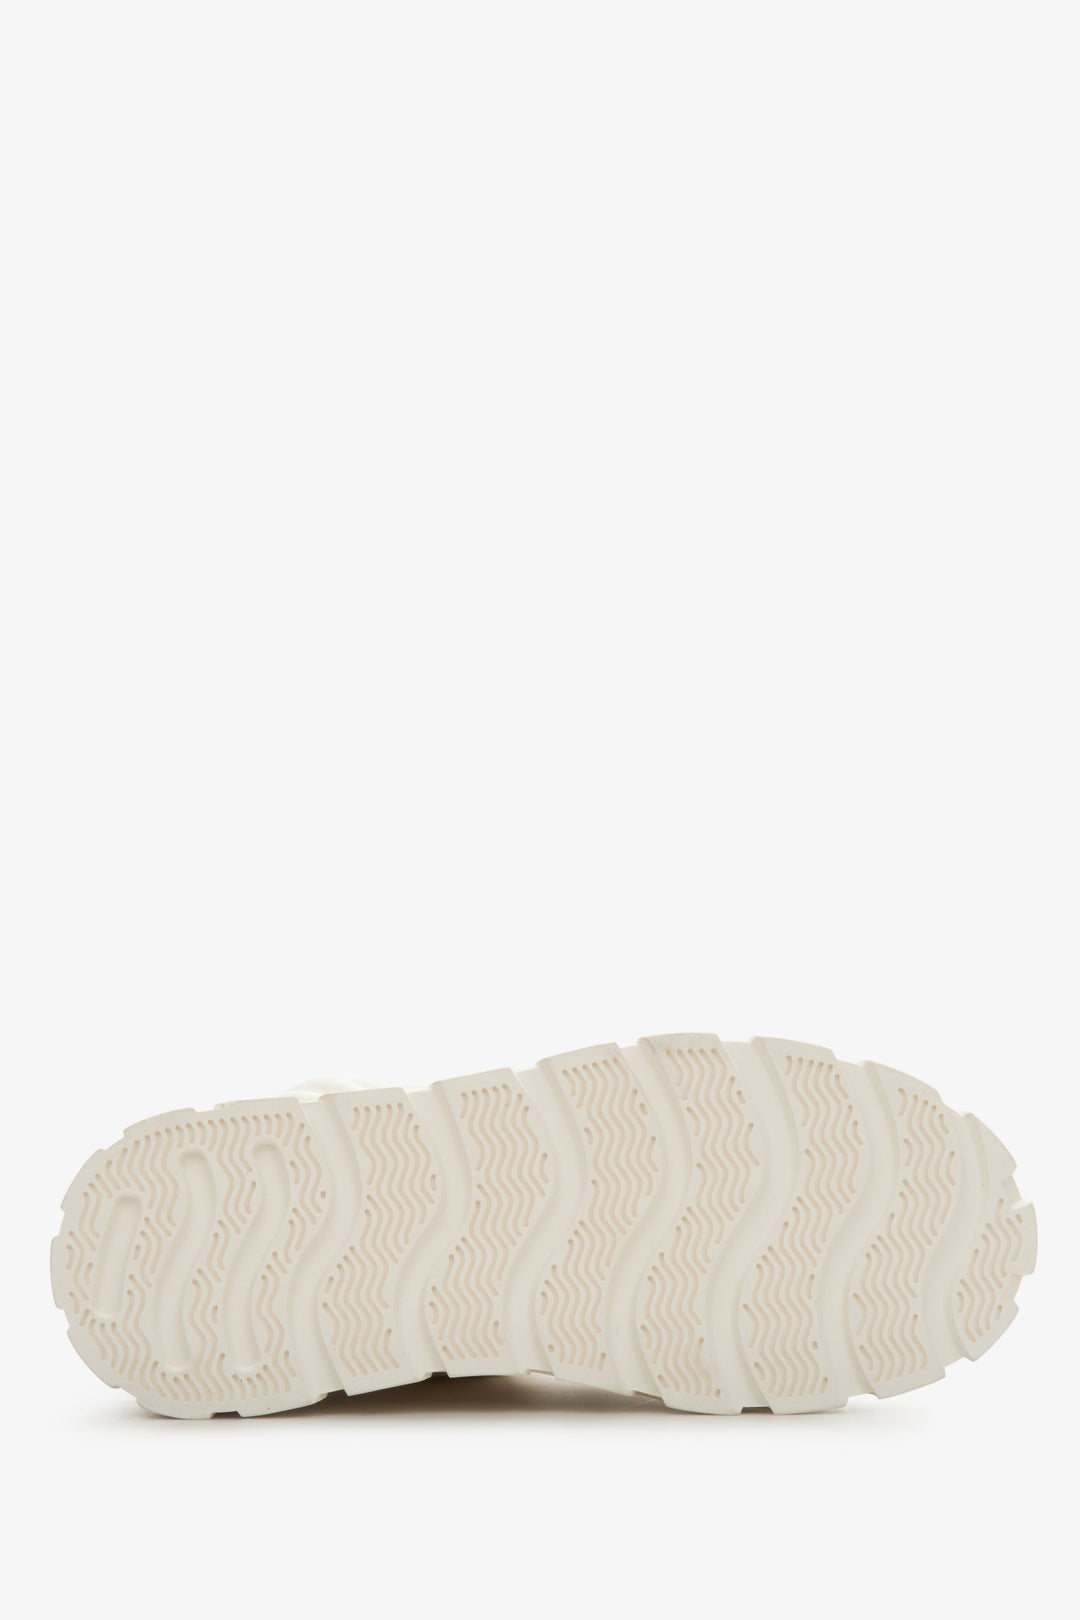 Women's light beige snow boots made of leather and fur Estro - a close-up on shoe sole.